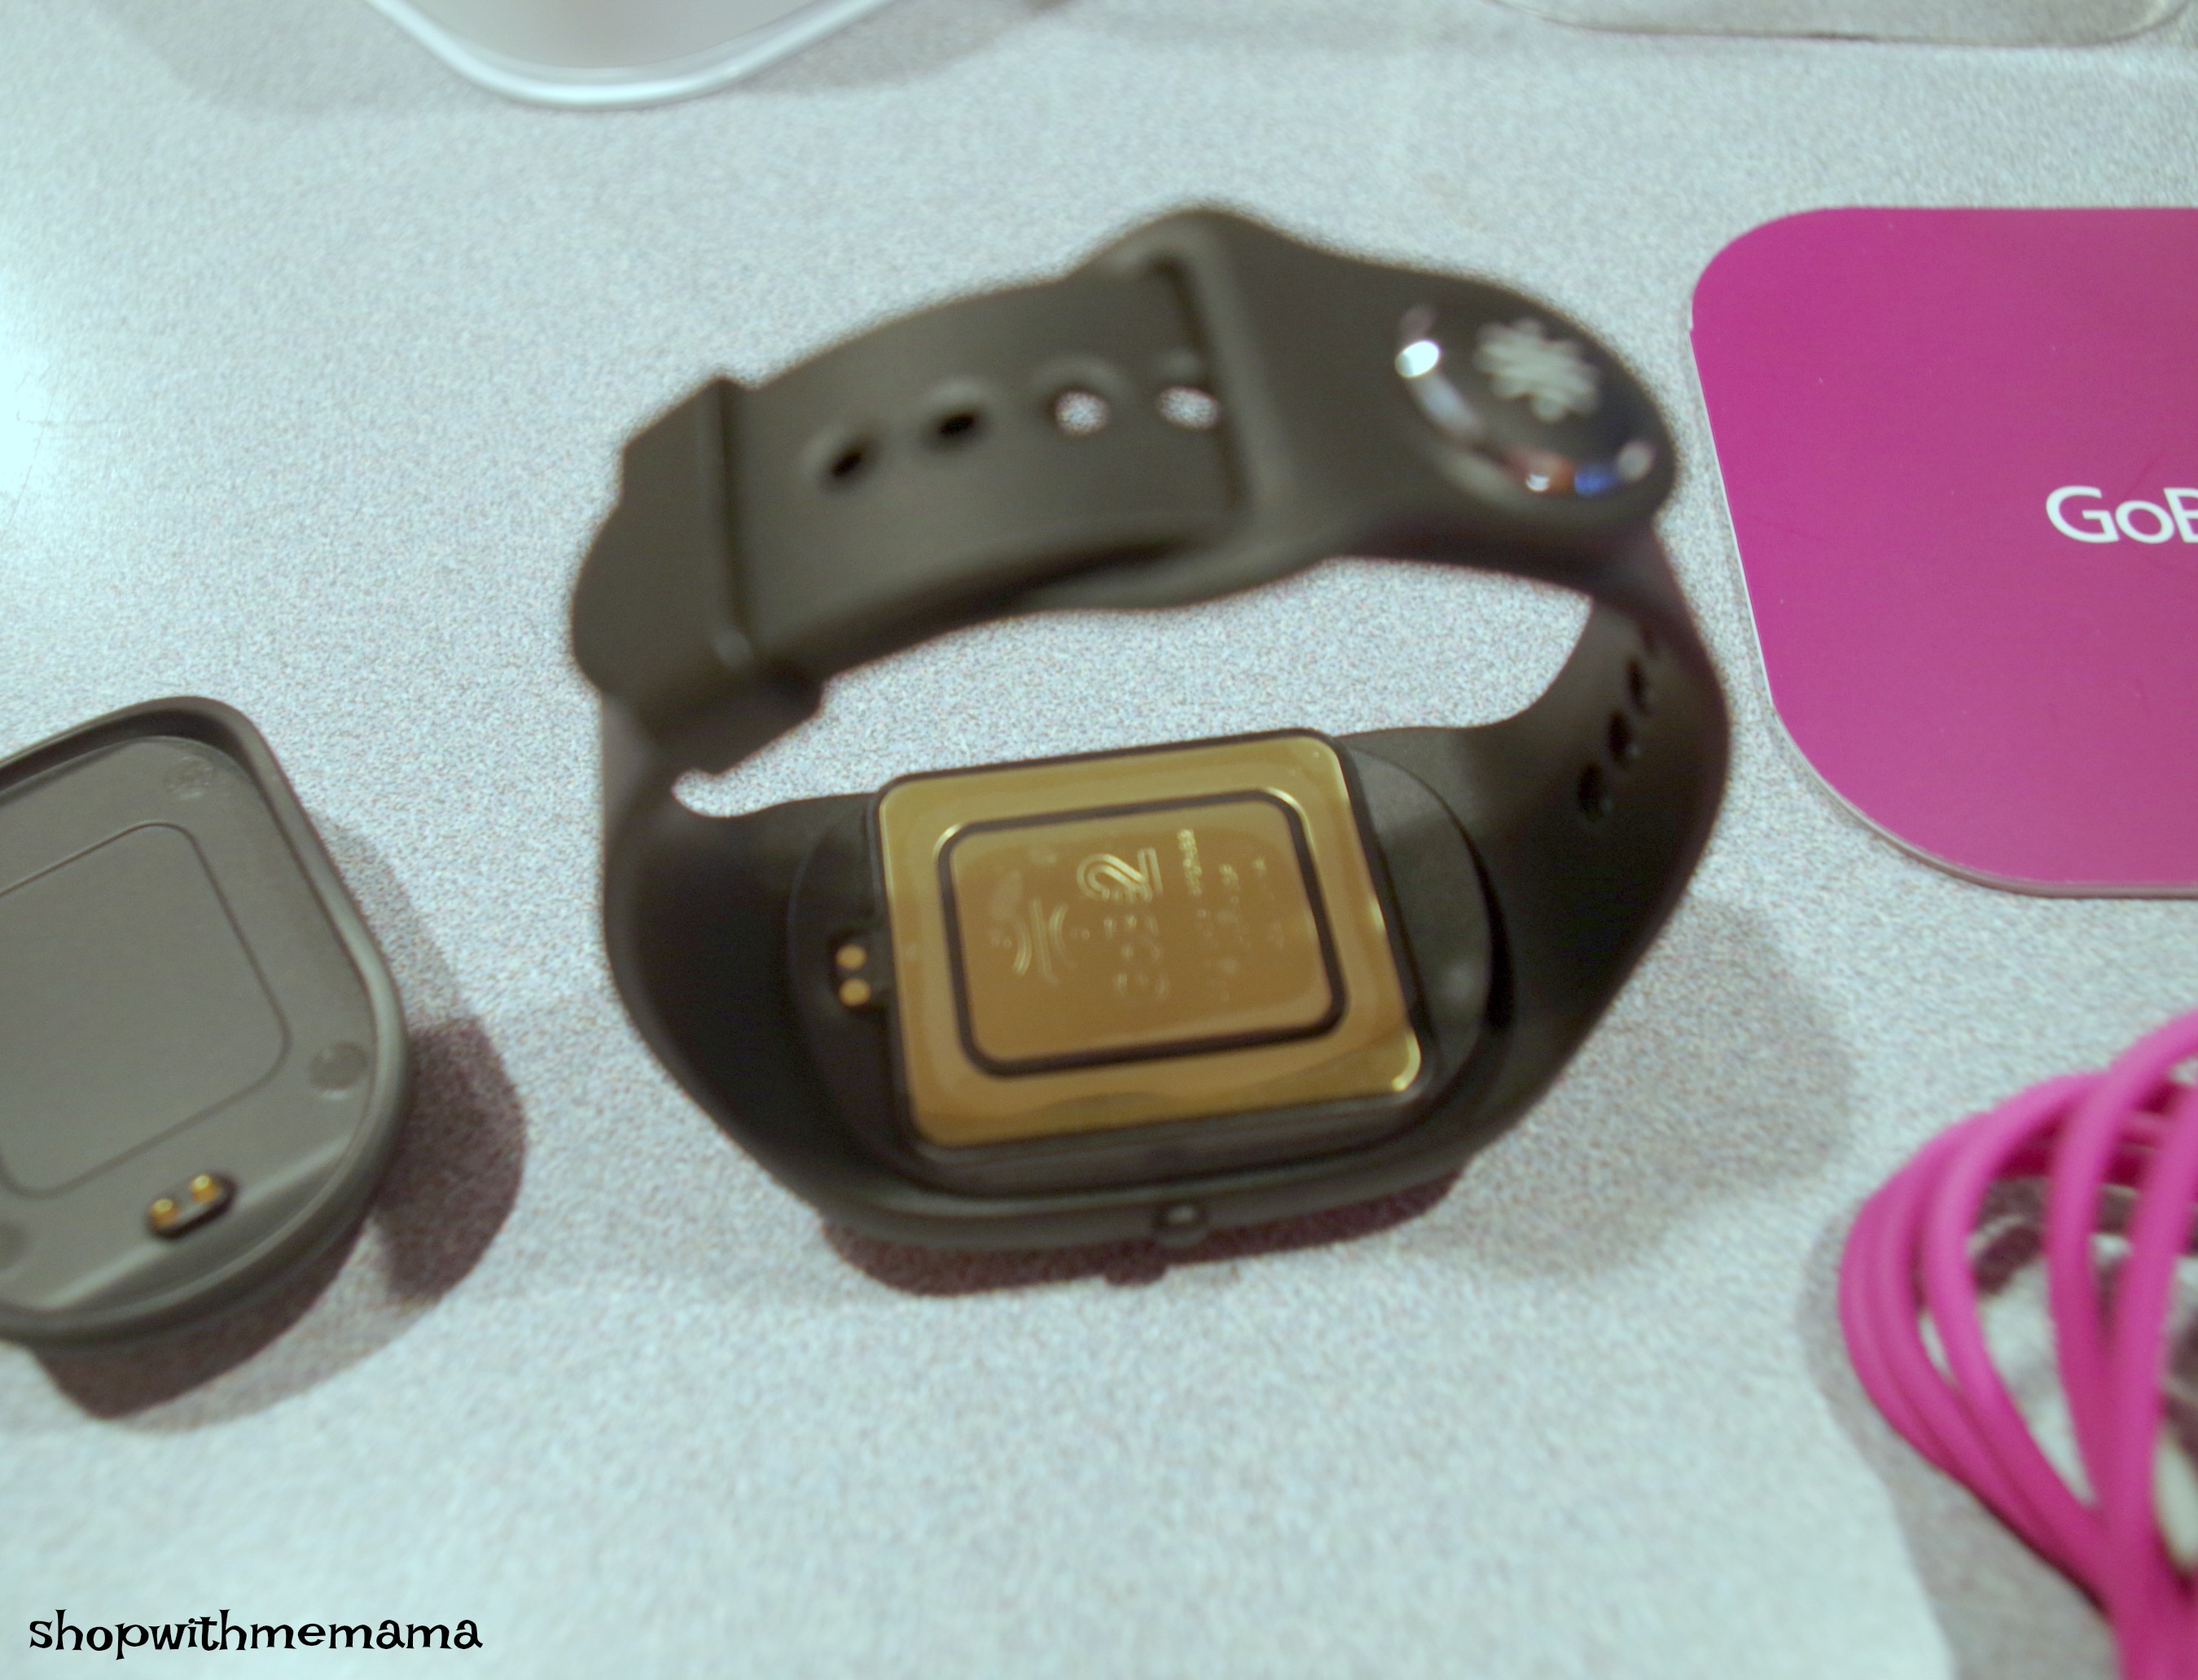 Healbe GoBe 2 All-In-One Fitness Tracker For Calorie Intake And More!